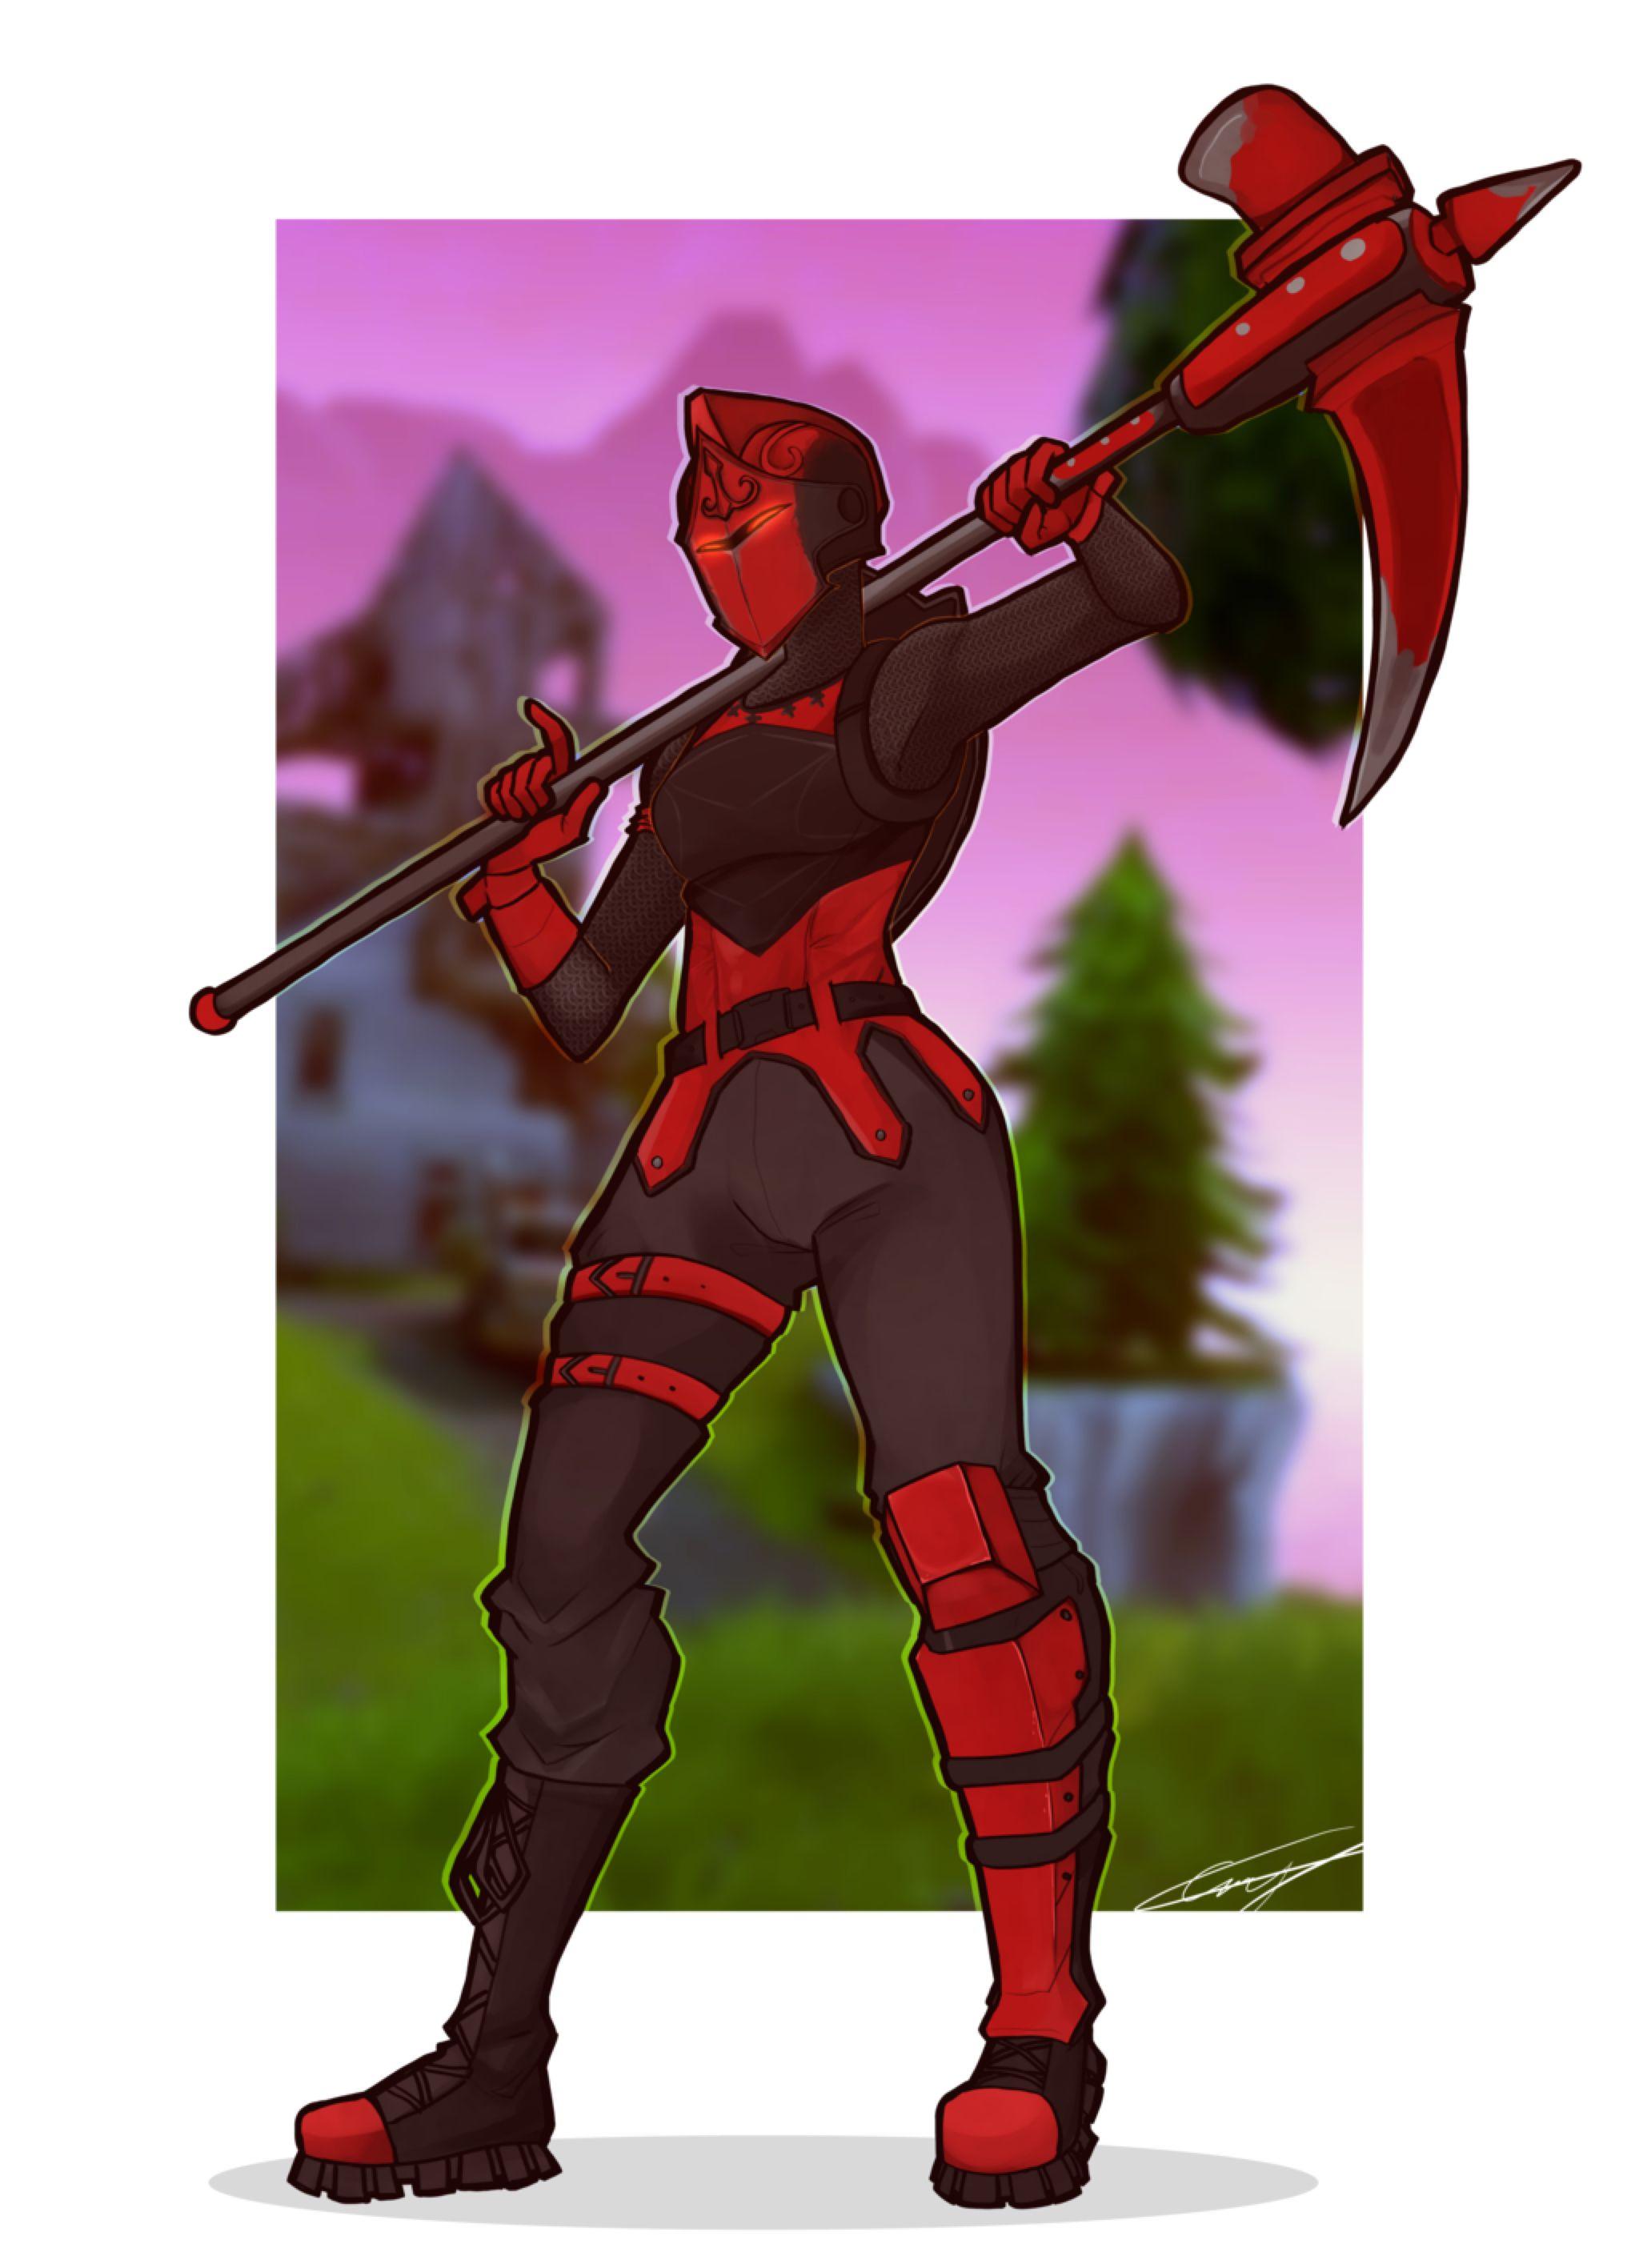 Red knight. Fortnite. Red